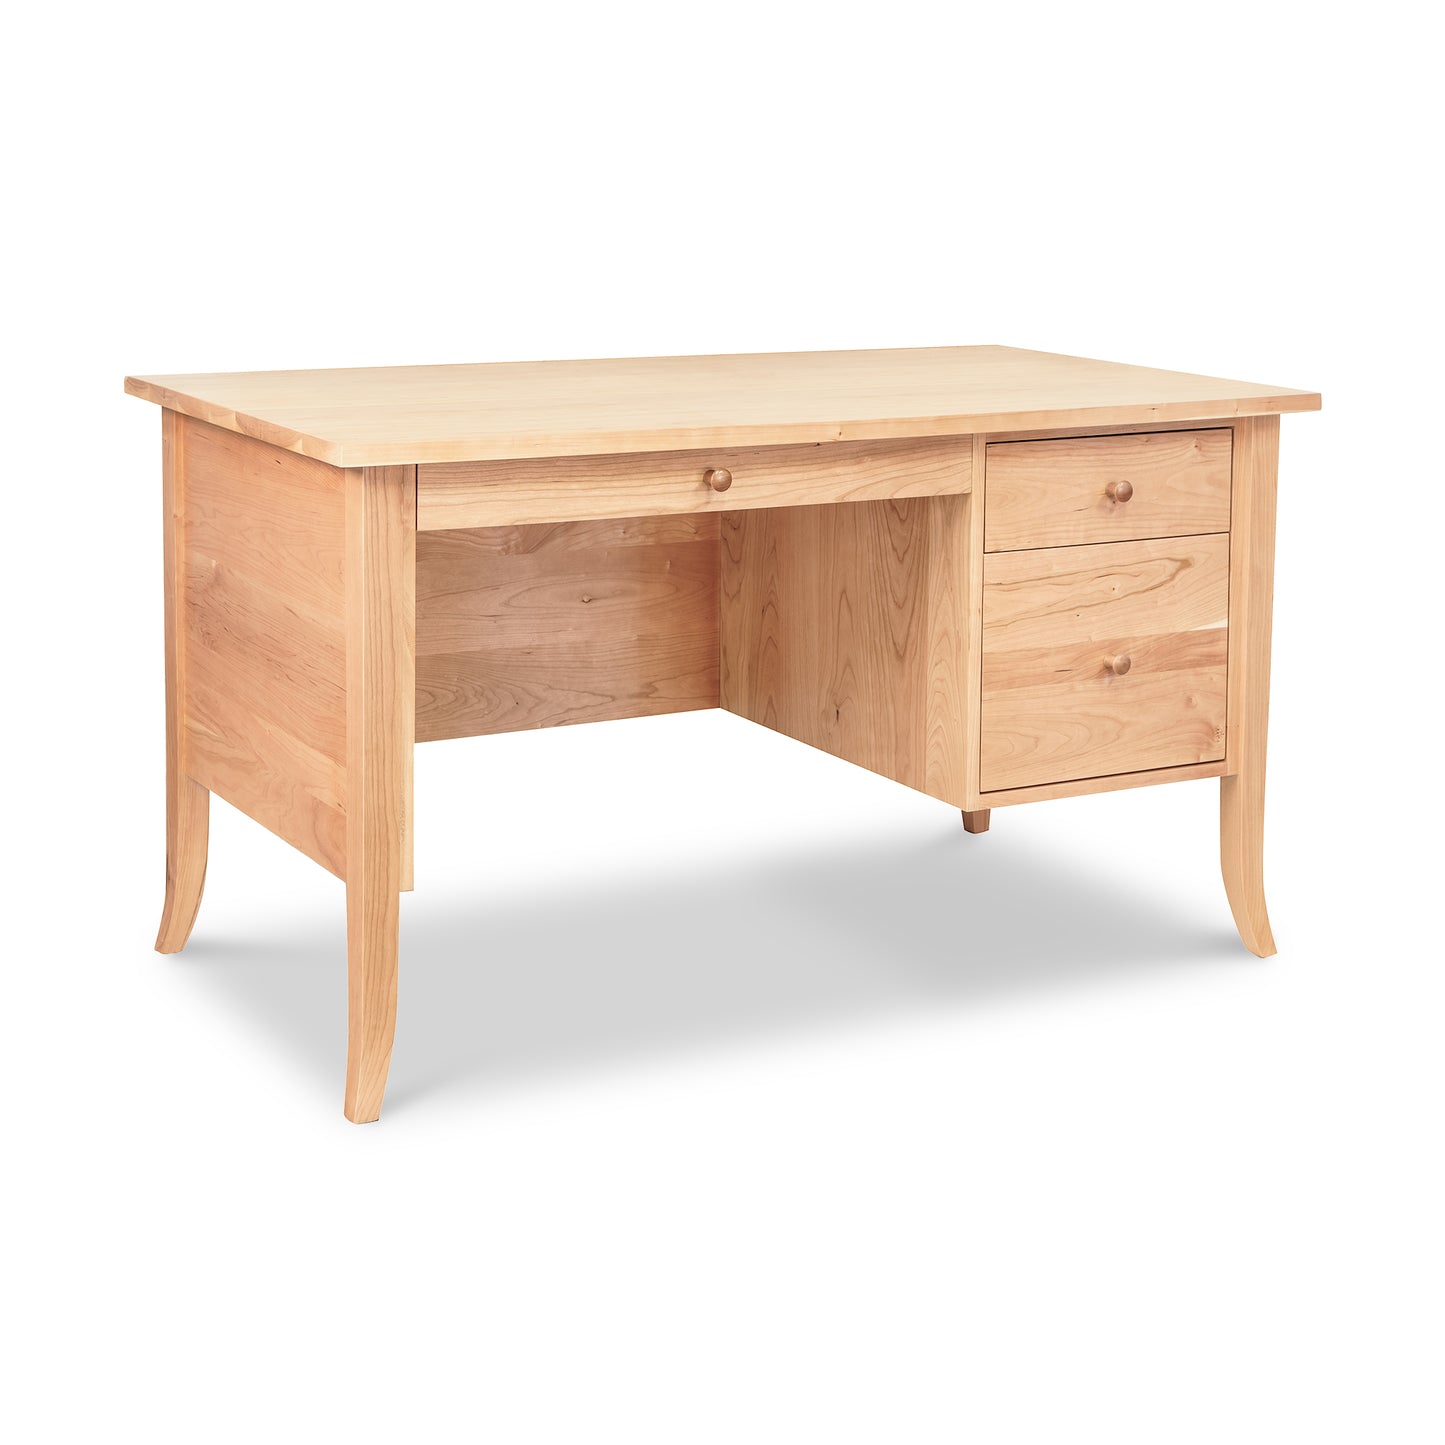 A Small Wood Flare Leg Executive Desk with a built-in file cabinet by Lyndon Furniture.